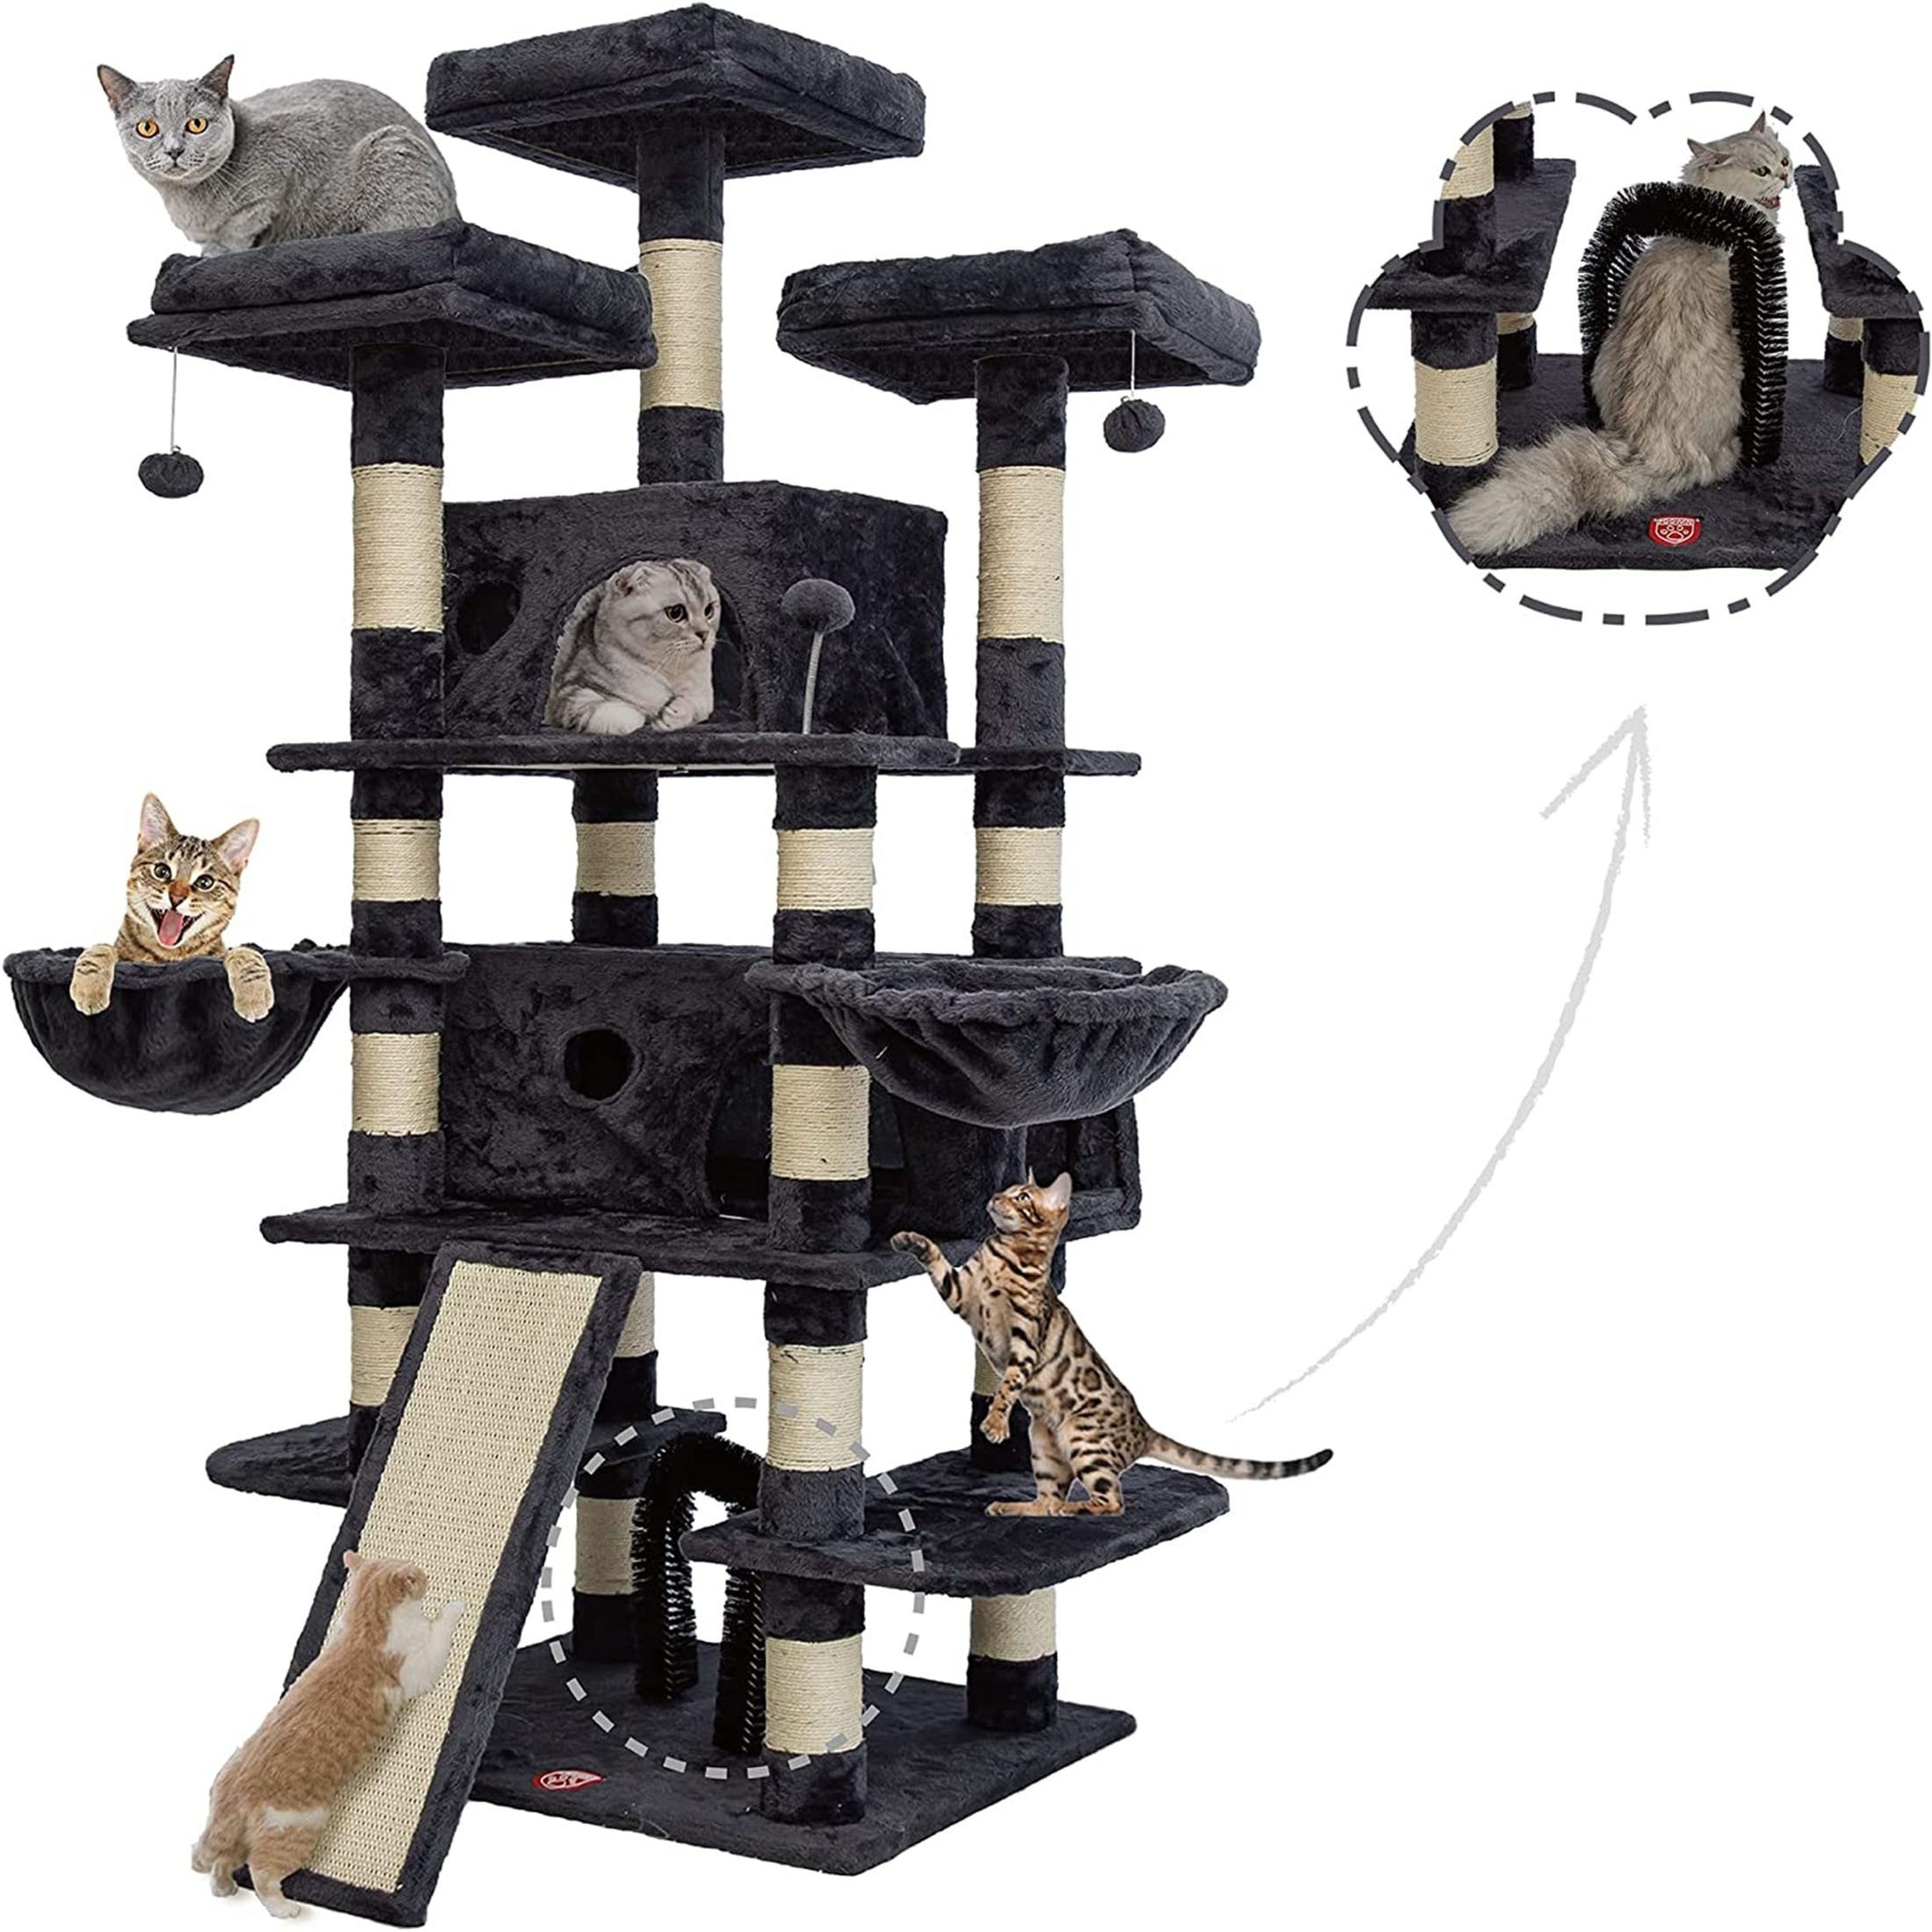 

68 Inches Big Multi-level Cat Tree, Tall Multi-cats Tower With 2 Big Cat Condo &cat Hair Brush, Large Cat Tree With 3 Plush Perches & Scratching Posts For Kittens (smokey Grey)